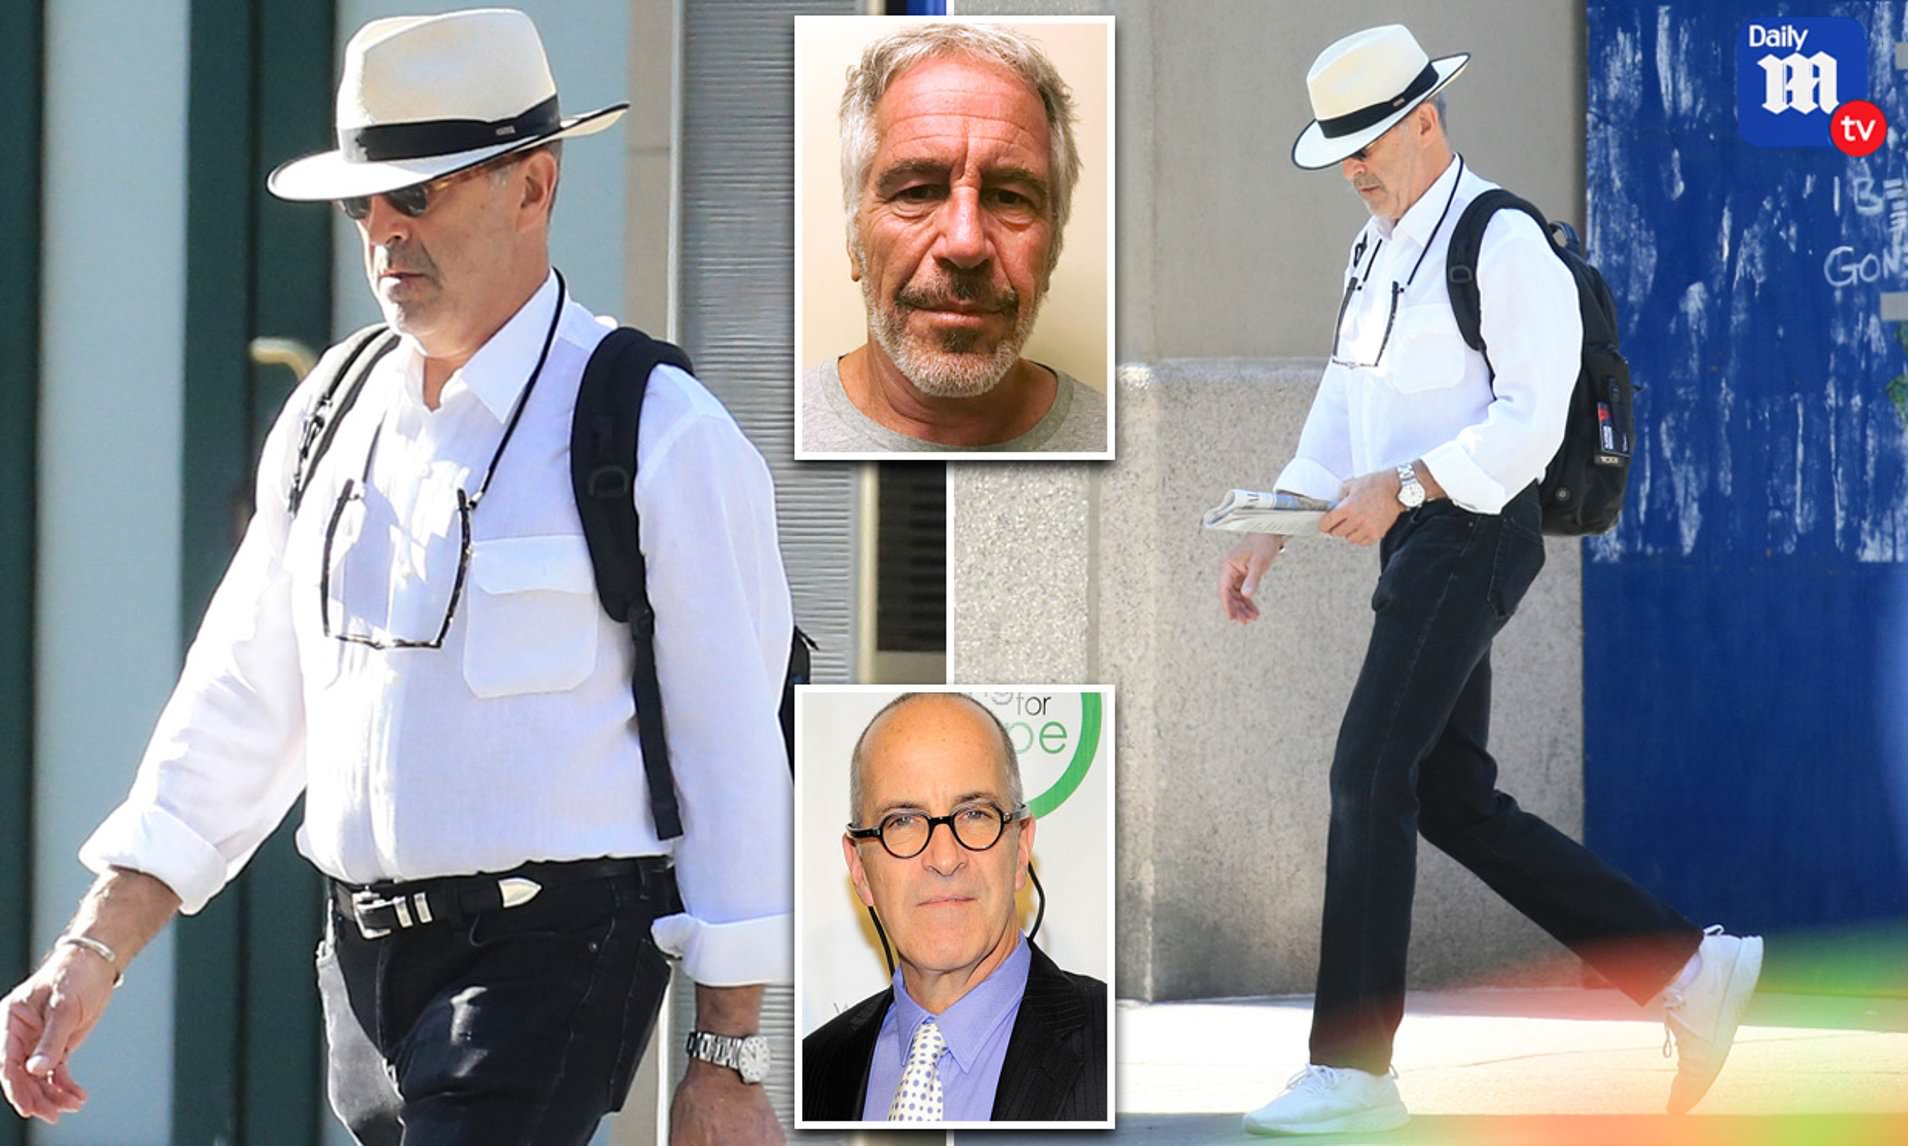 Does it run in the family? All about Jeffrey Epstein #39 s brother Mark